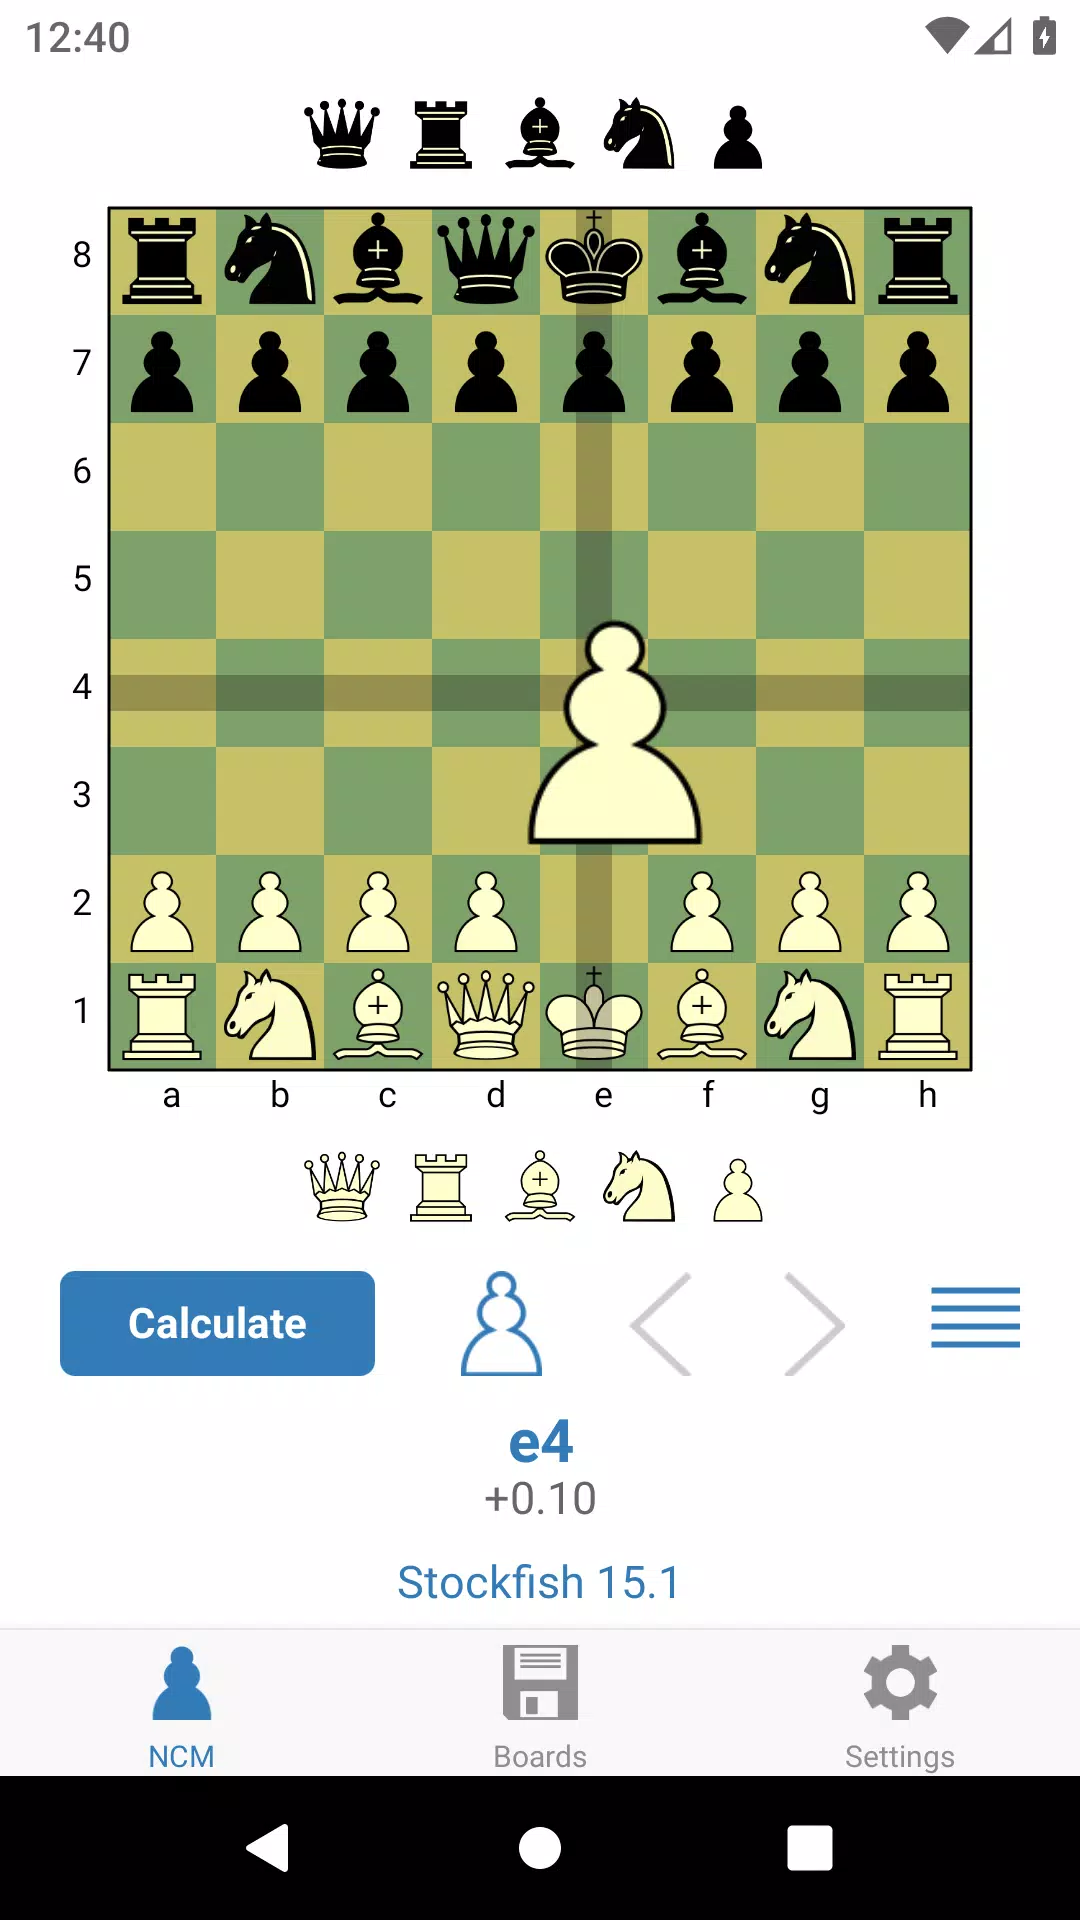 Next Chess Move by Next Chess Move LLC